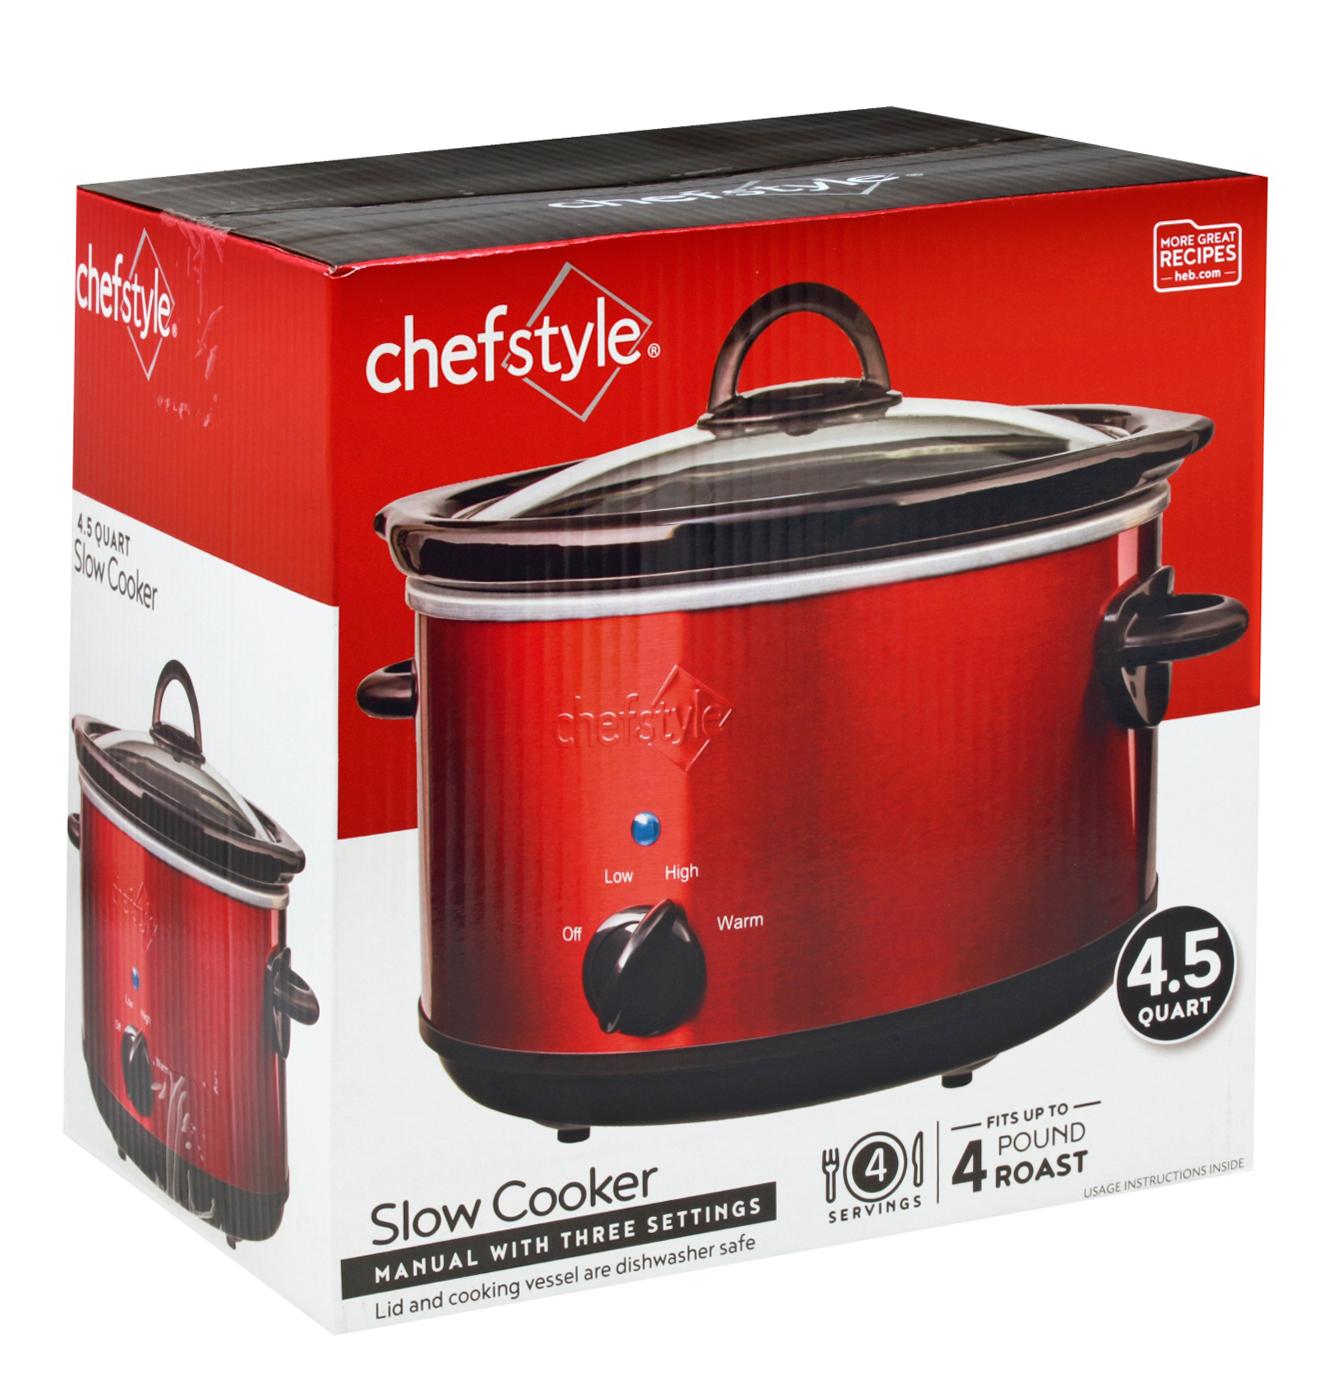 chefstyle Manual Slow Cooker - Red; image 2 of 2